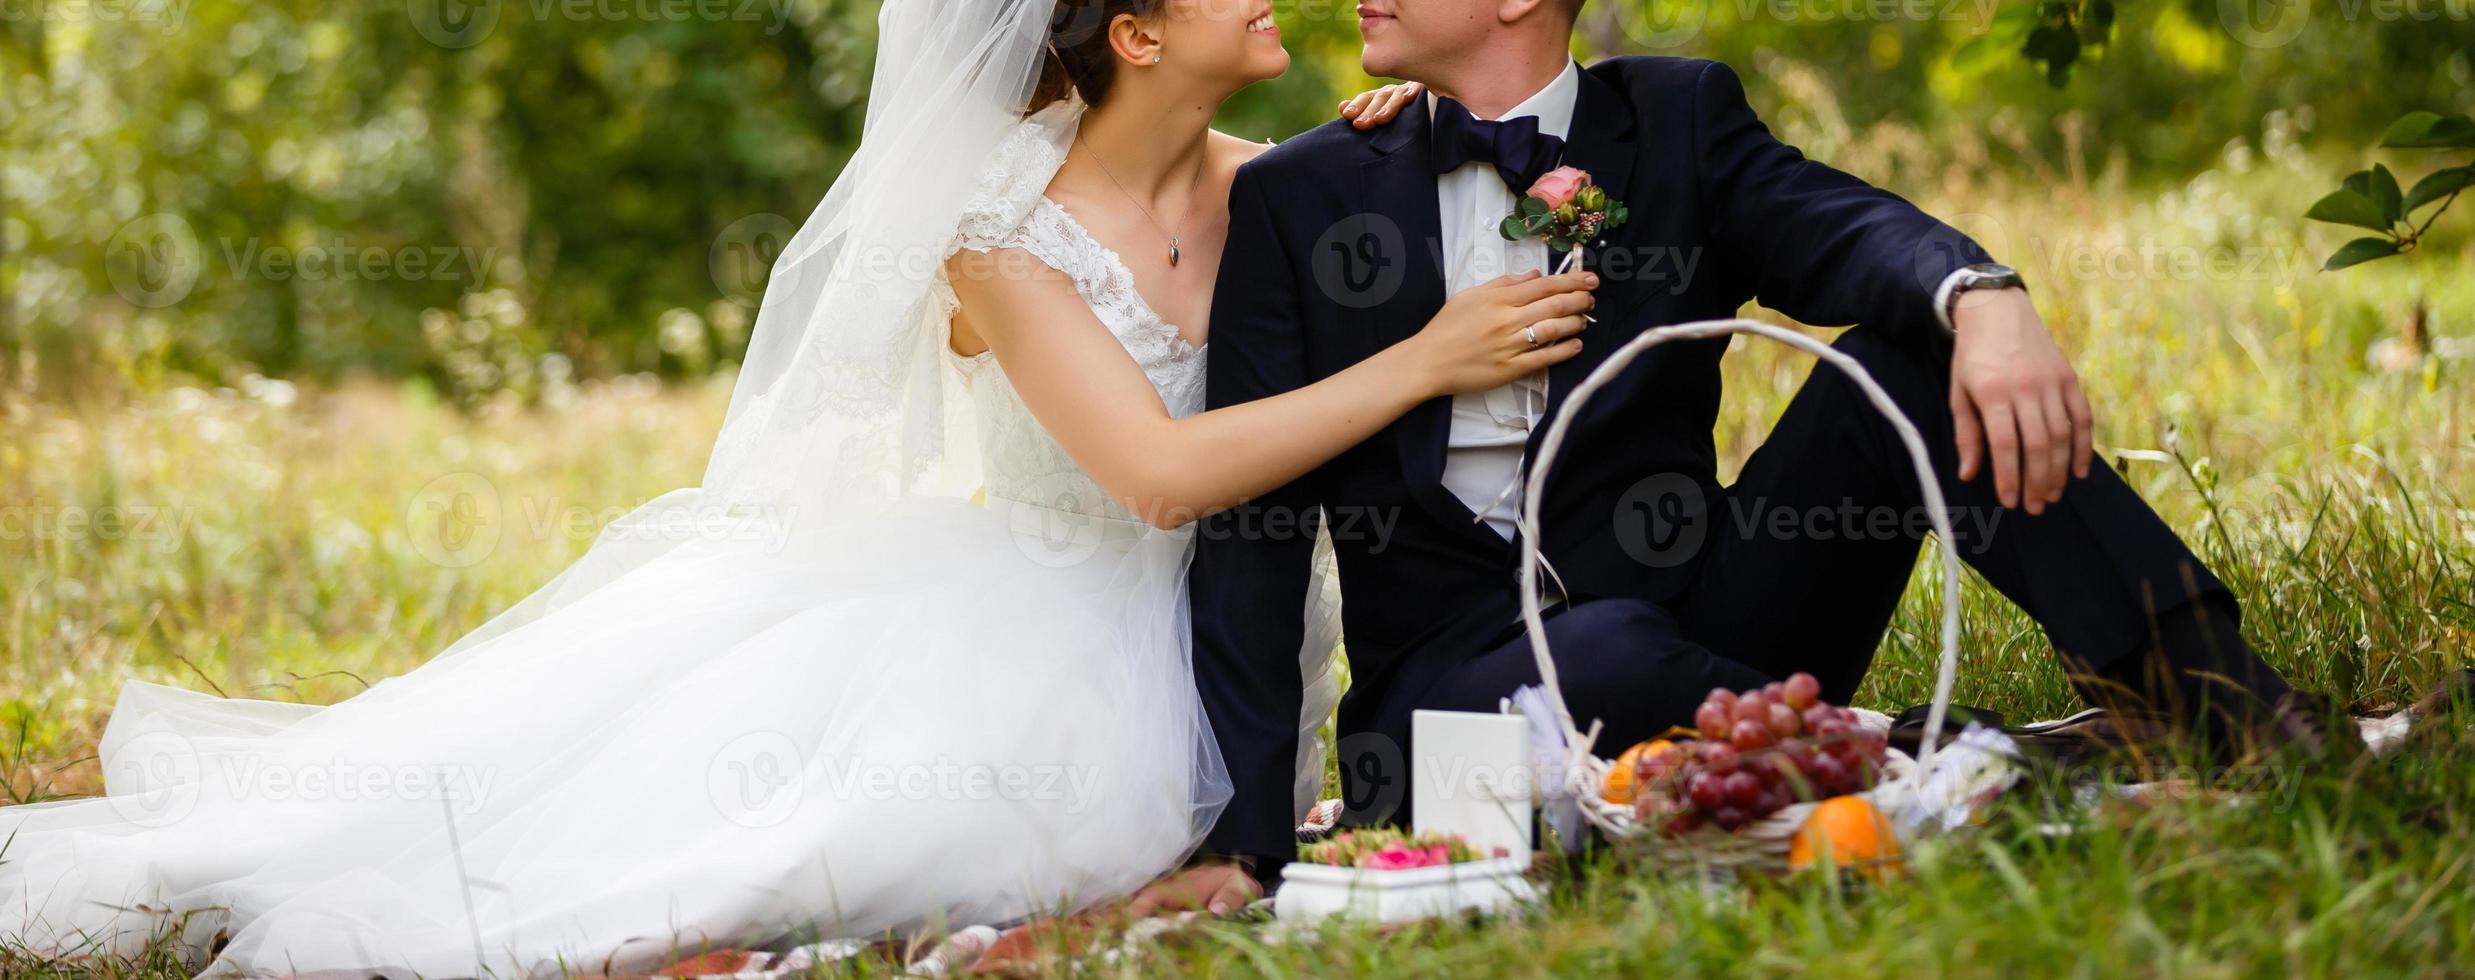 Happy bride and groom at a park on their wedding day photo